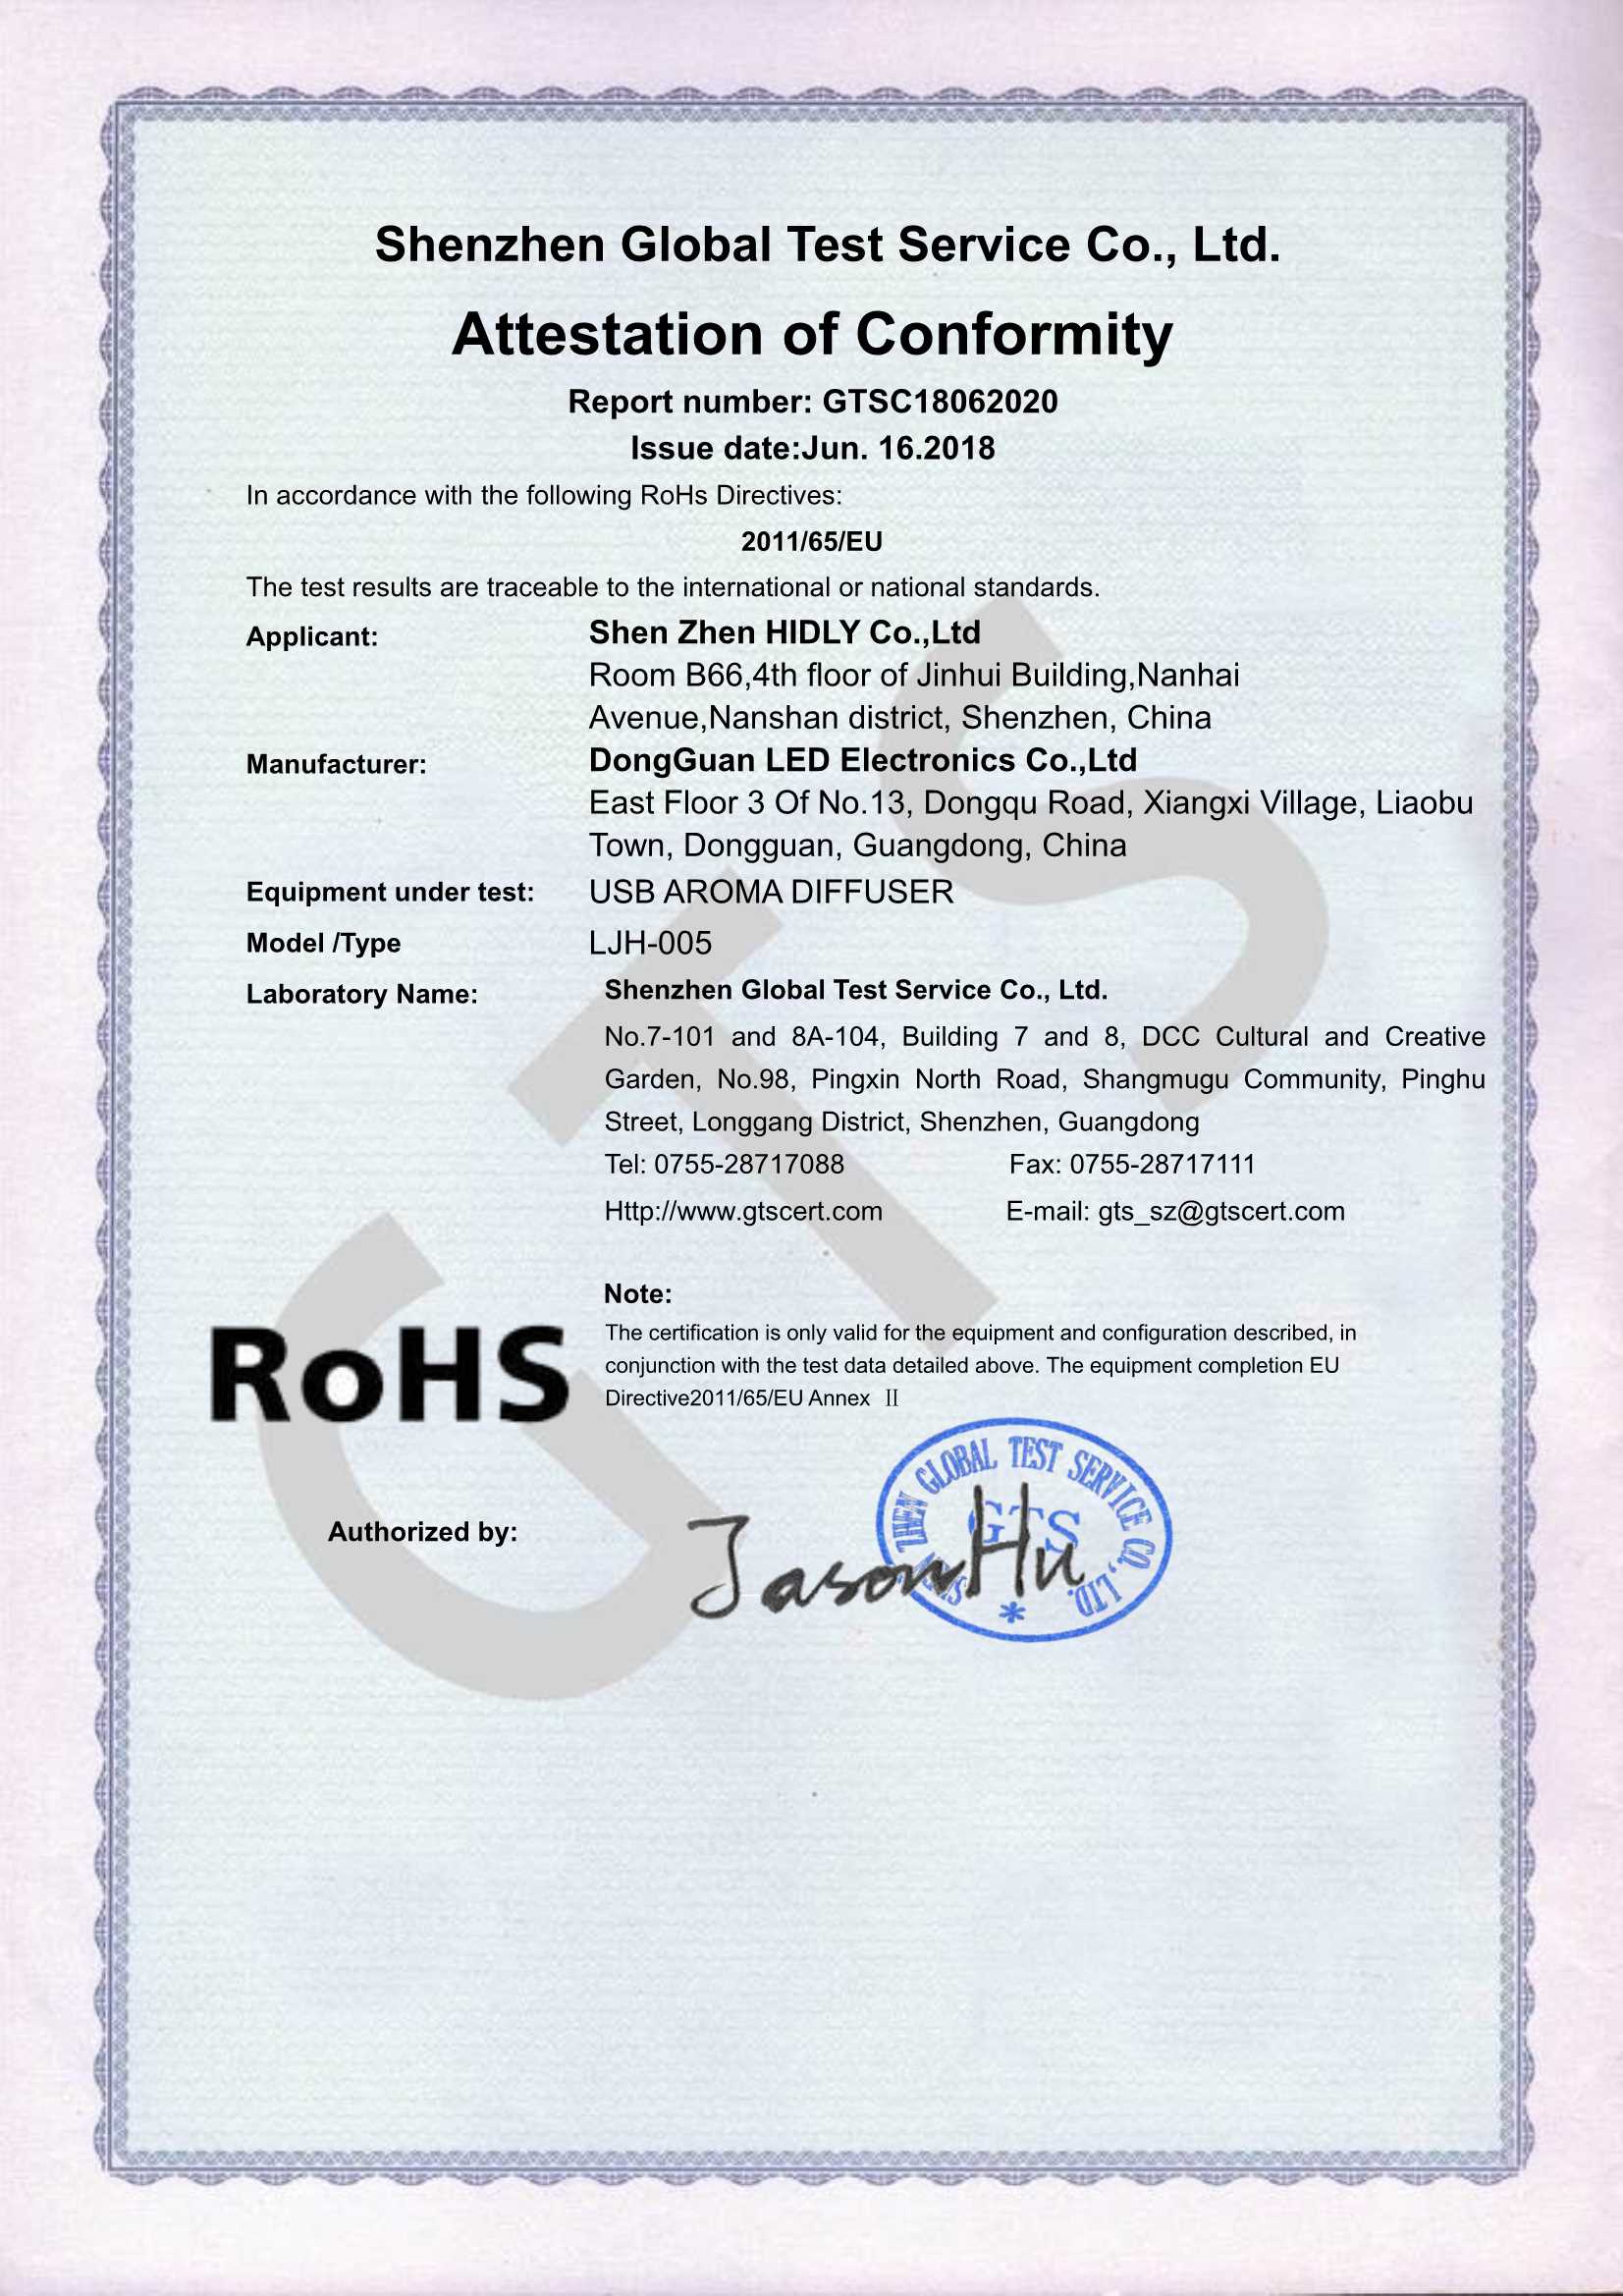 Our aroma humidifier(LJH005)have acquired ROHS Certifications: